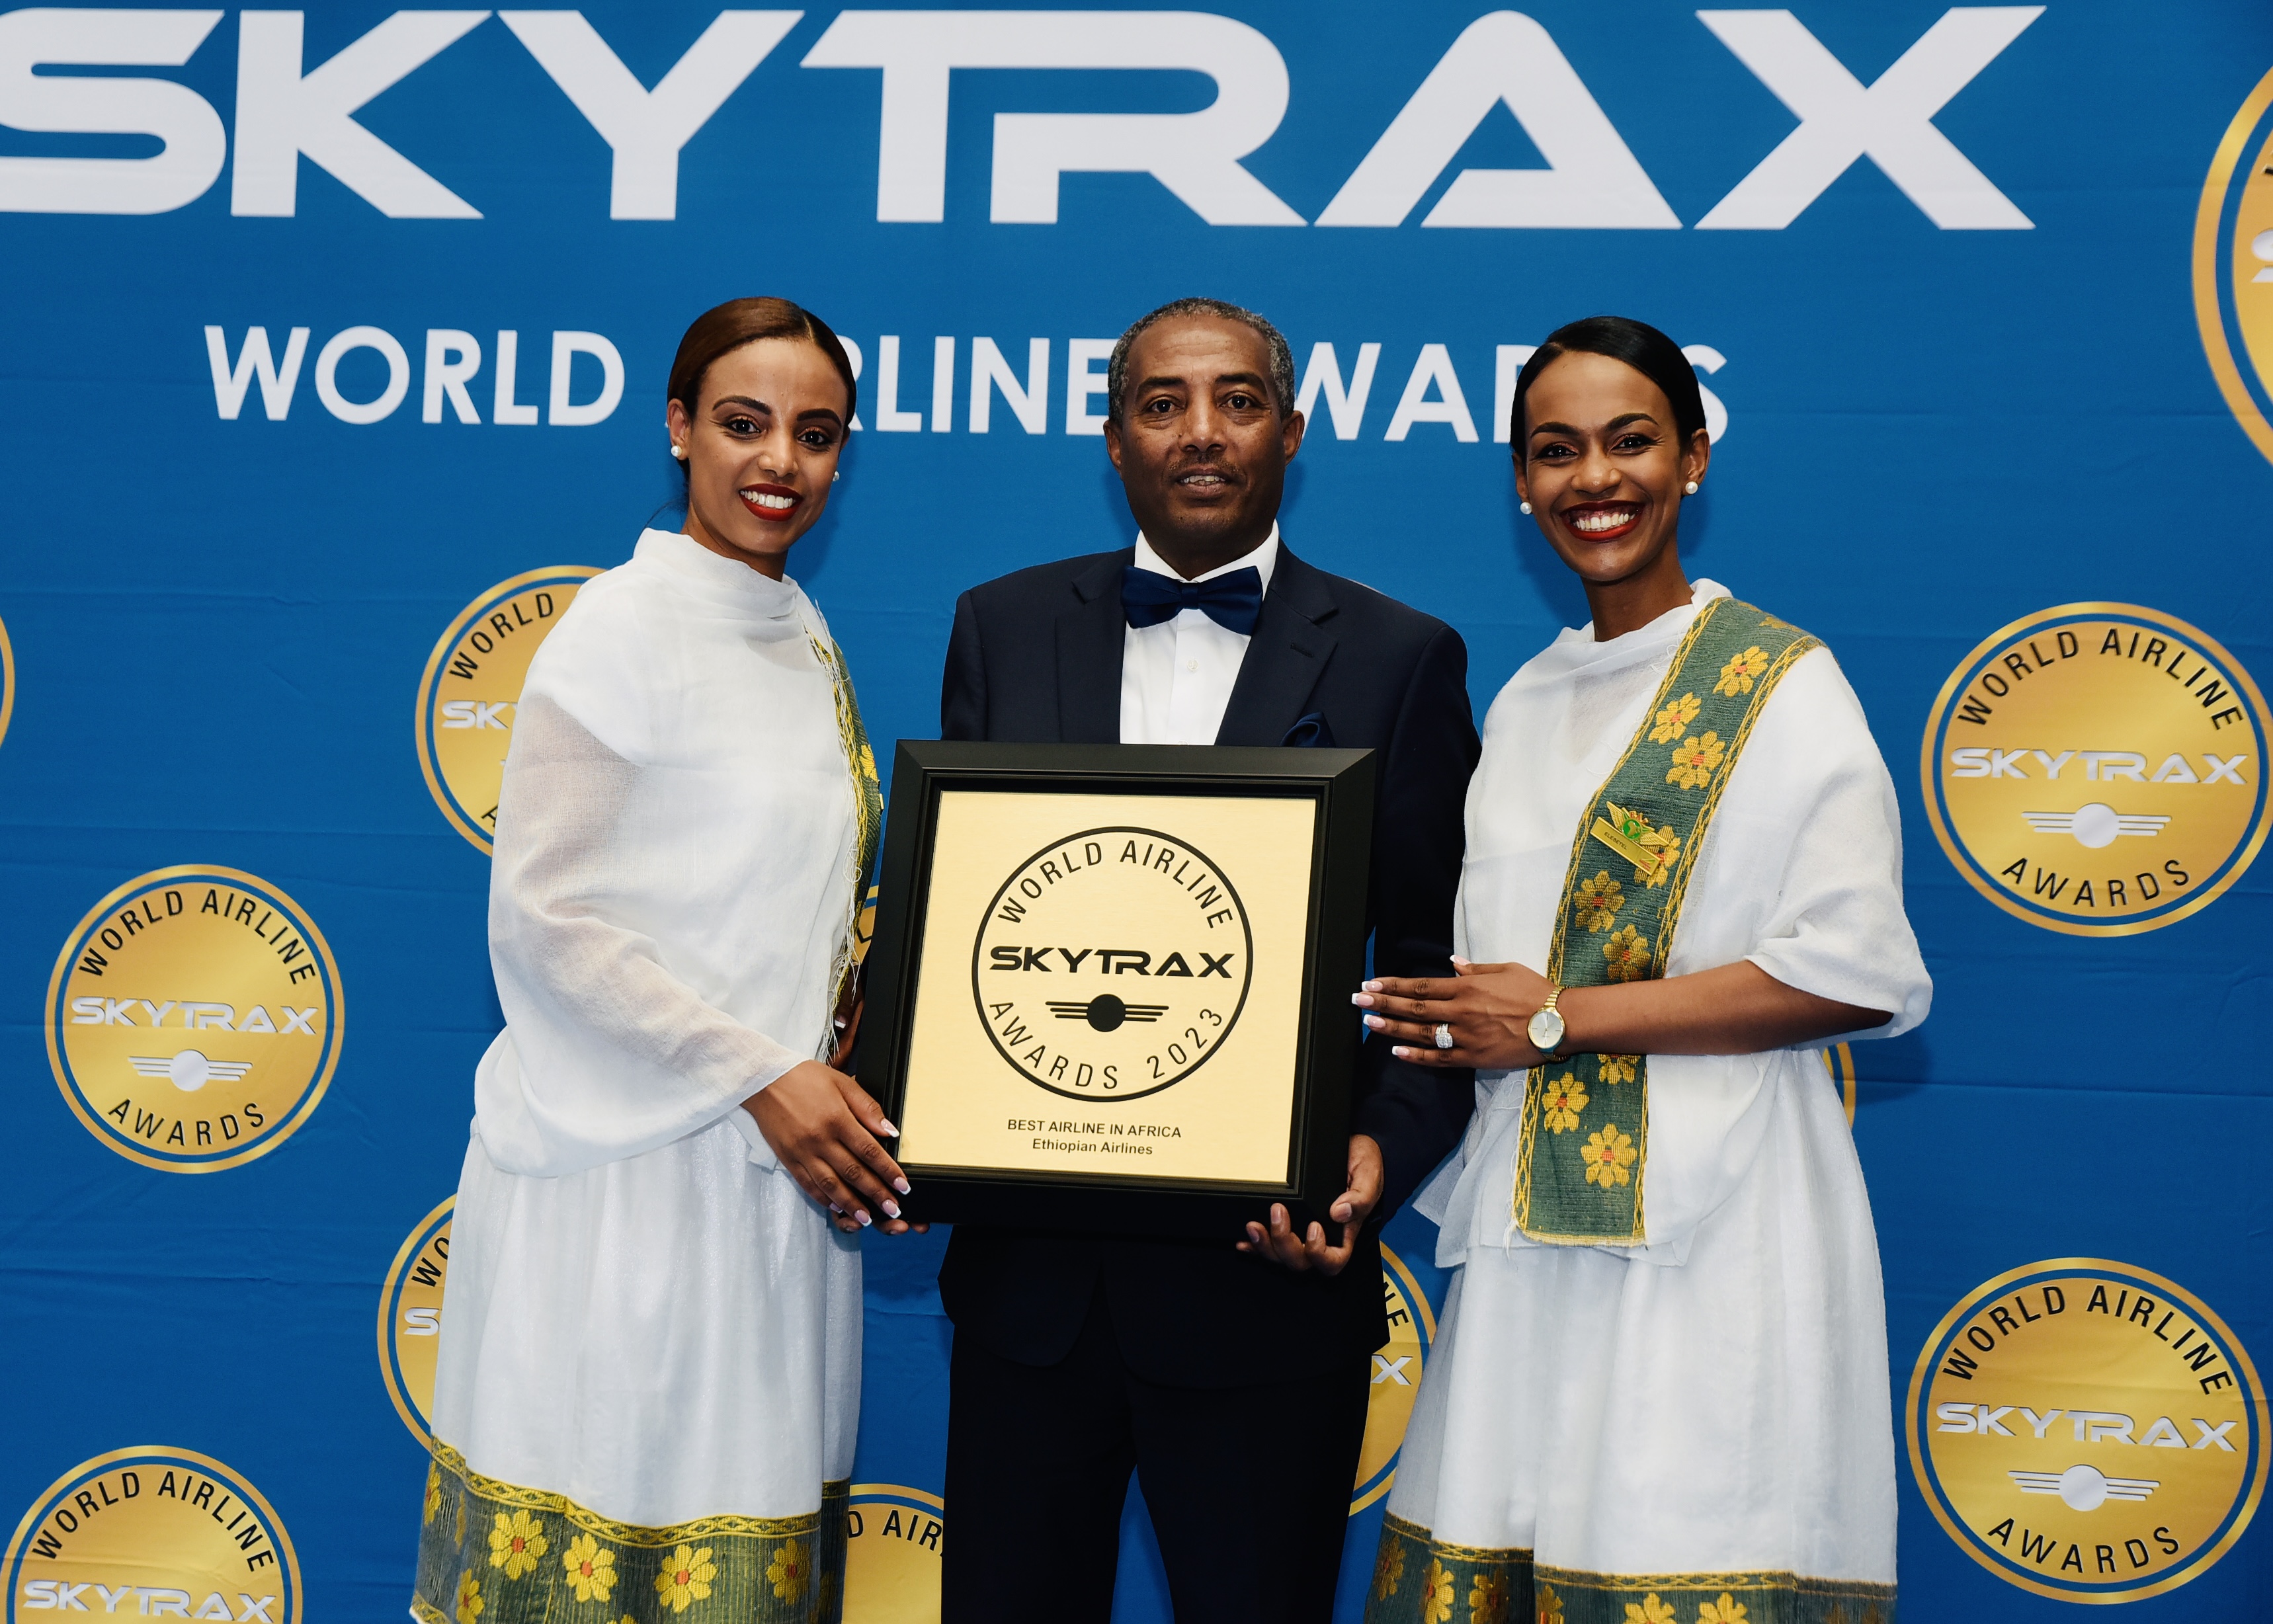 Ethiopian Remains to be Africa’s Leading Airline at SKYTRAX